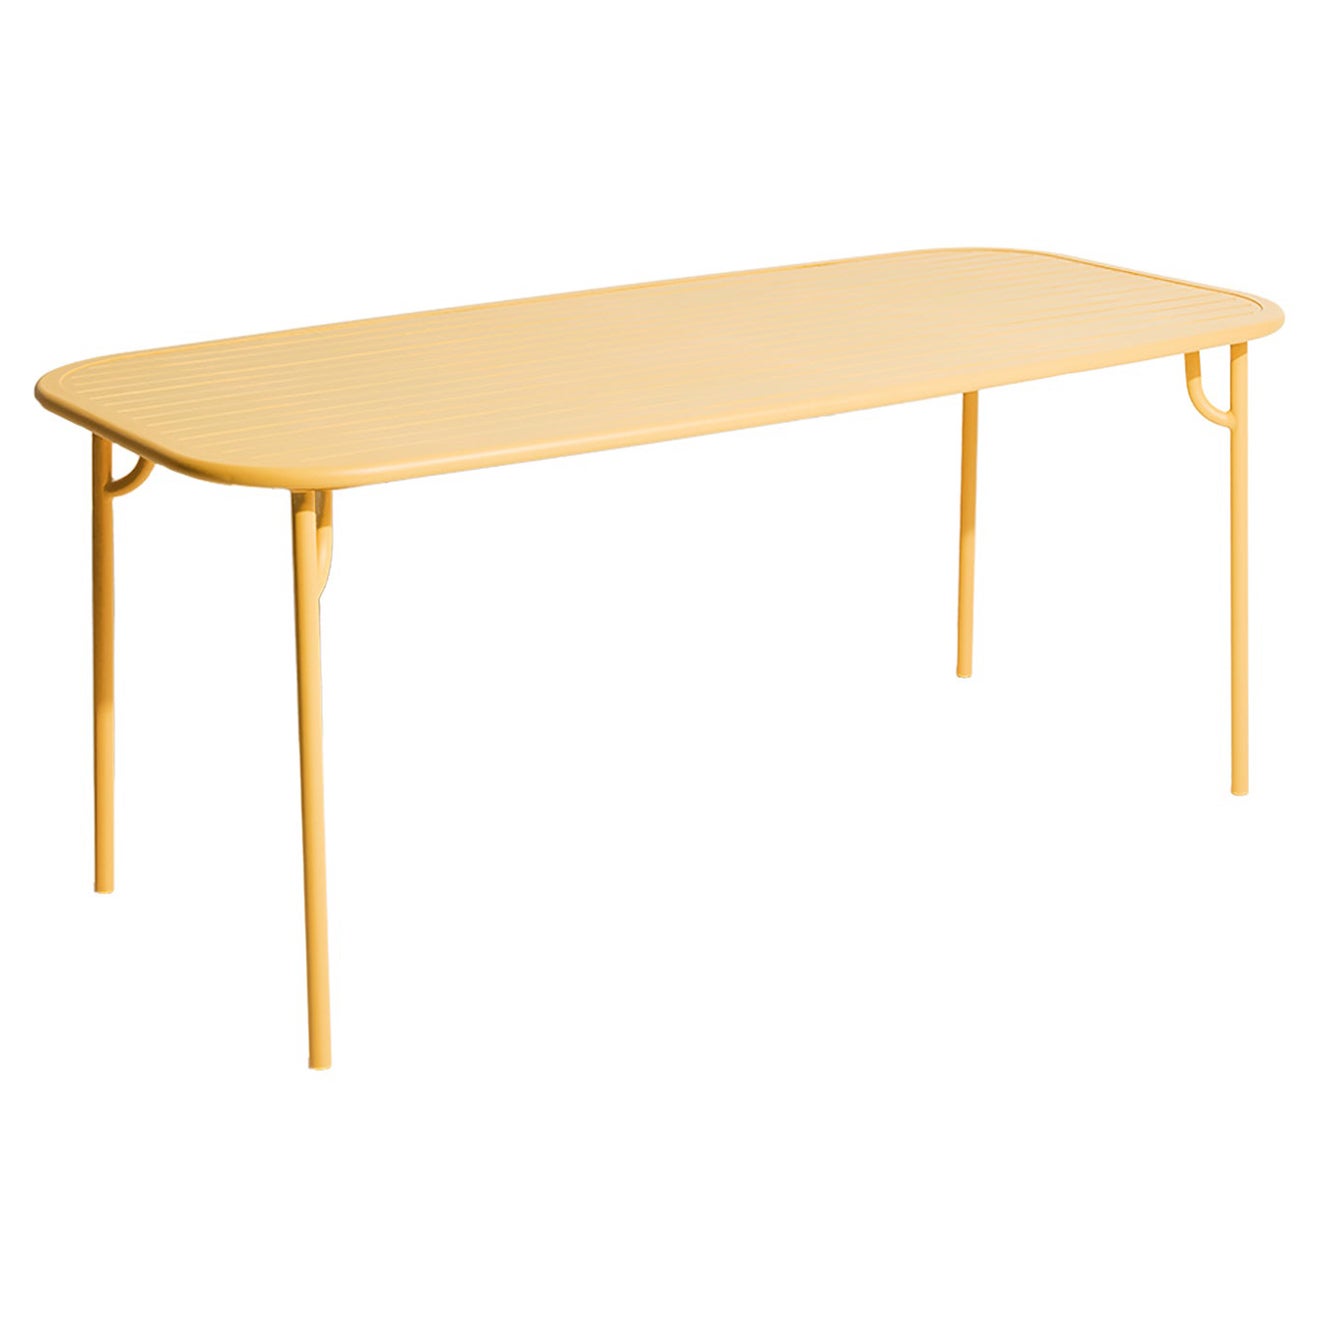 Petite Friture Week-End Medium Rectangular Dining Table in Saffron with Slats For Sale